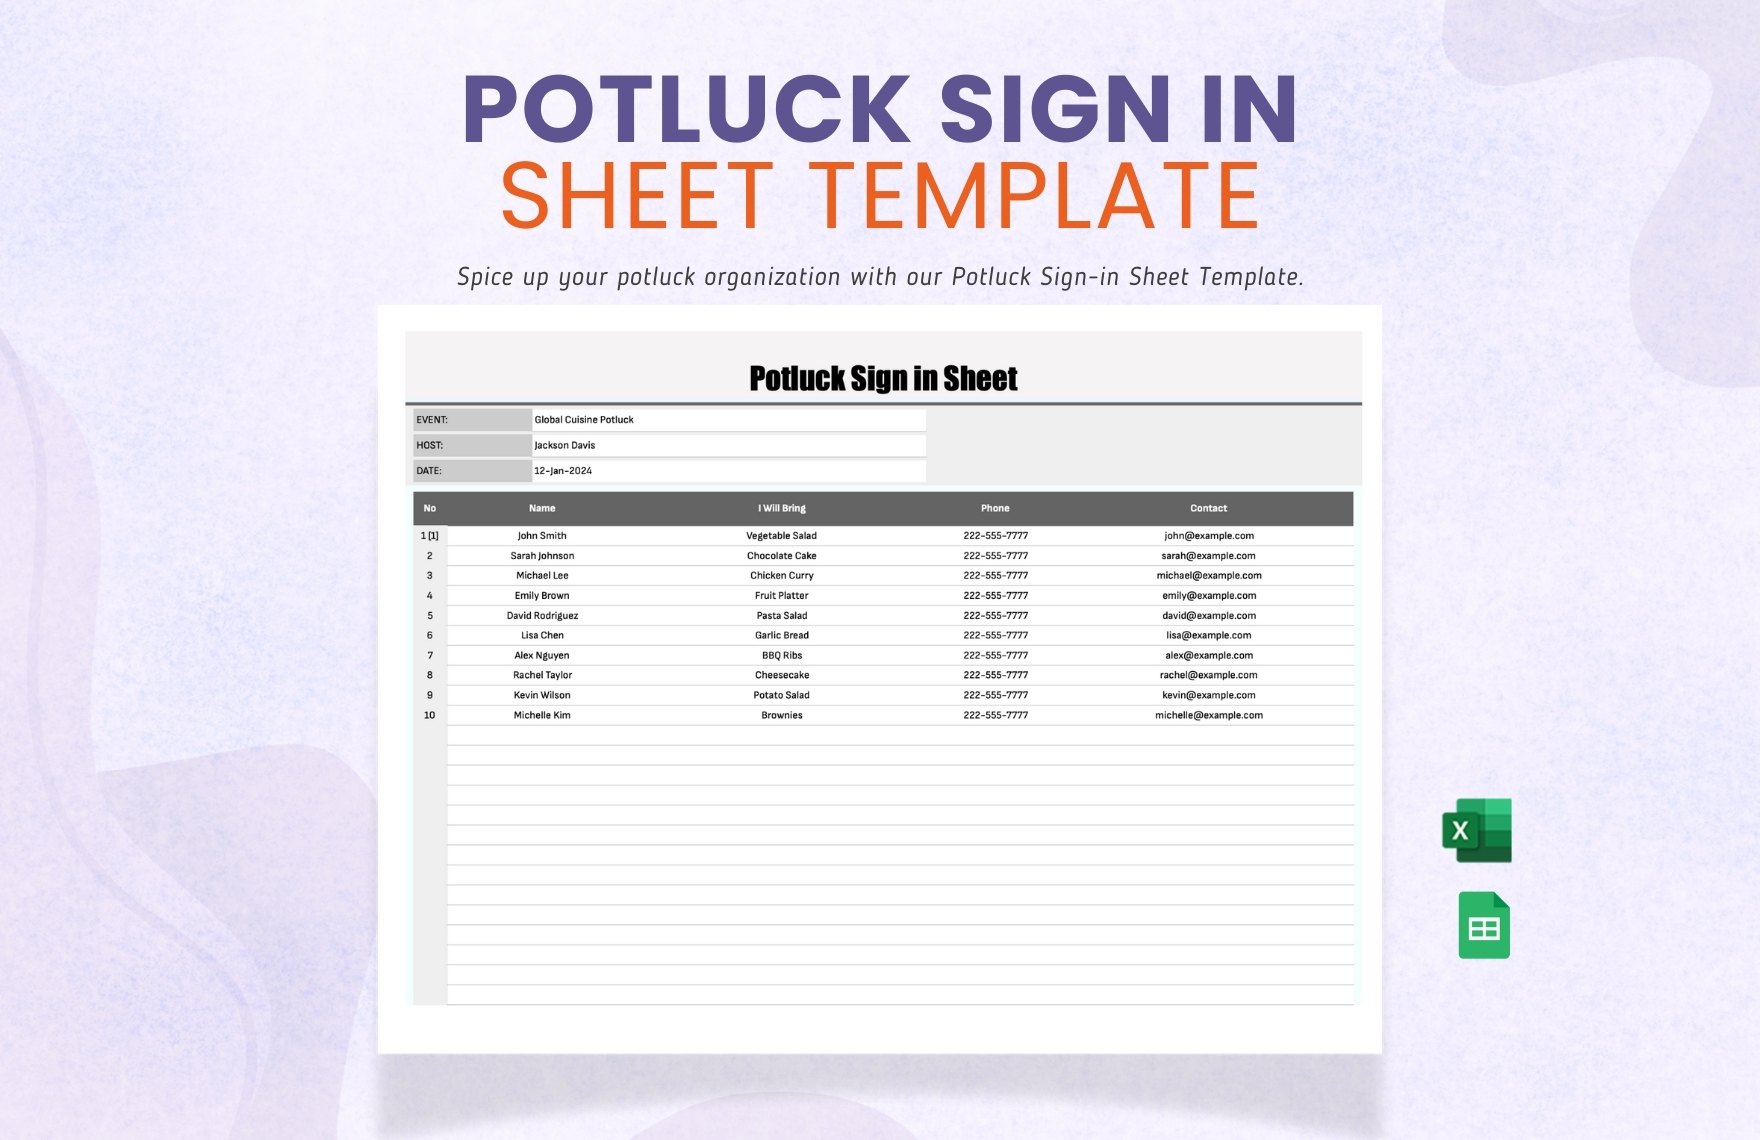 Free Potluck Sign in Sheet Template in Excel, Google Sheets